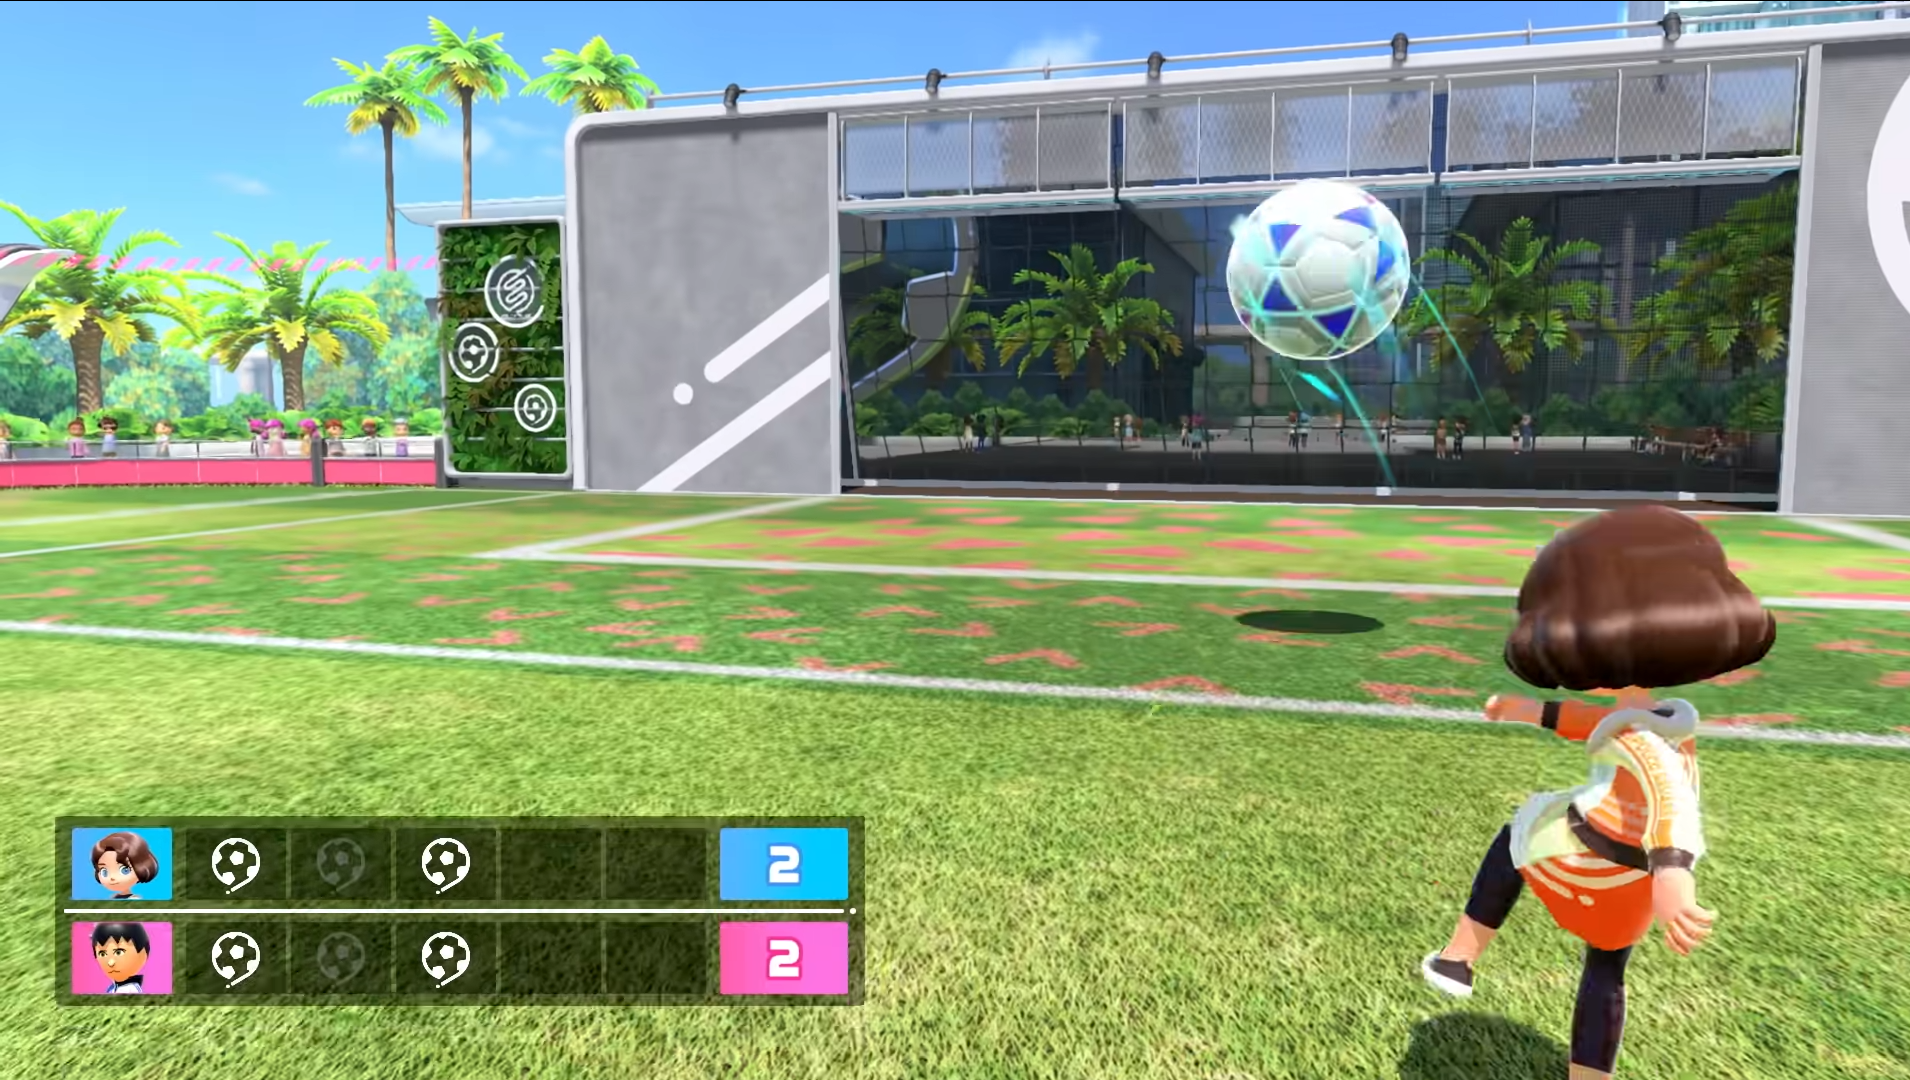 SOCCER in Nintendo Switch Sports Gameplay 